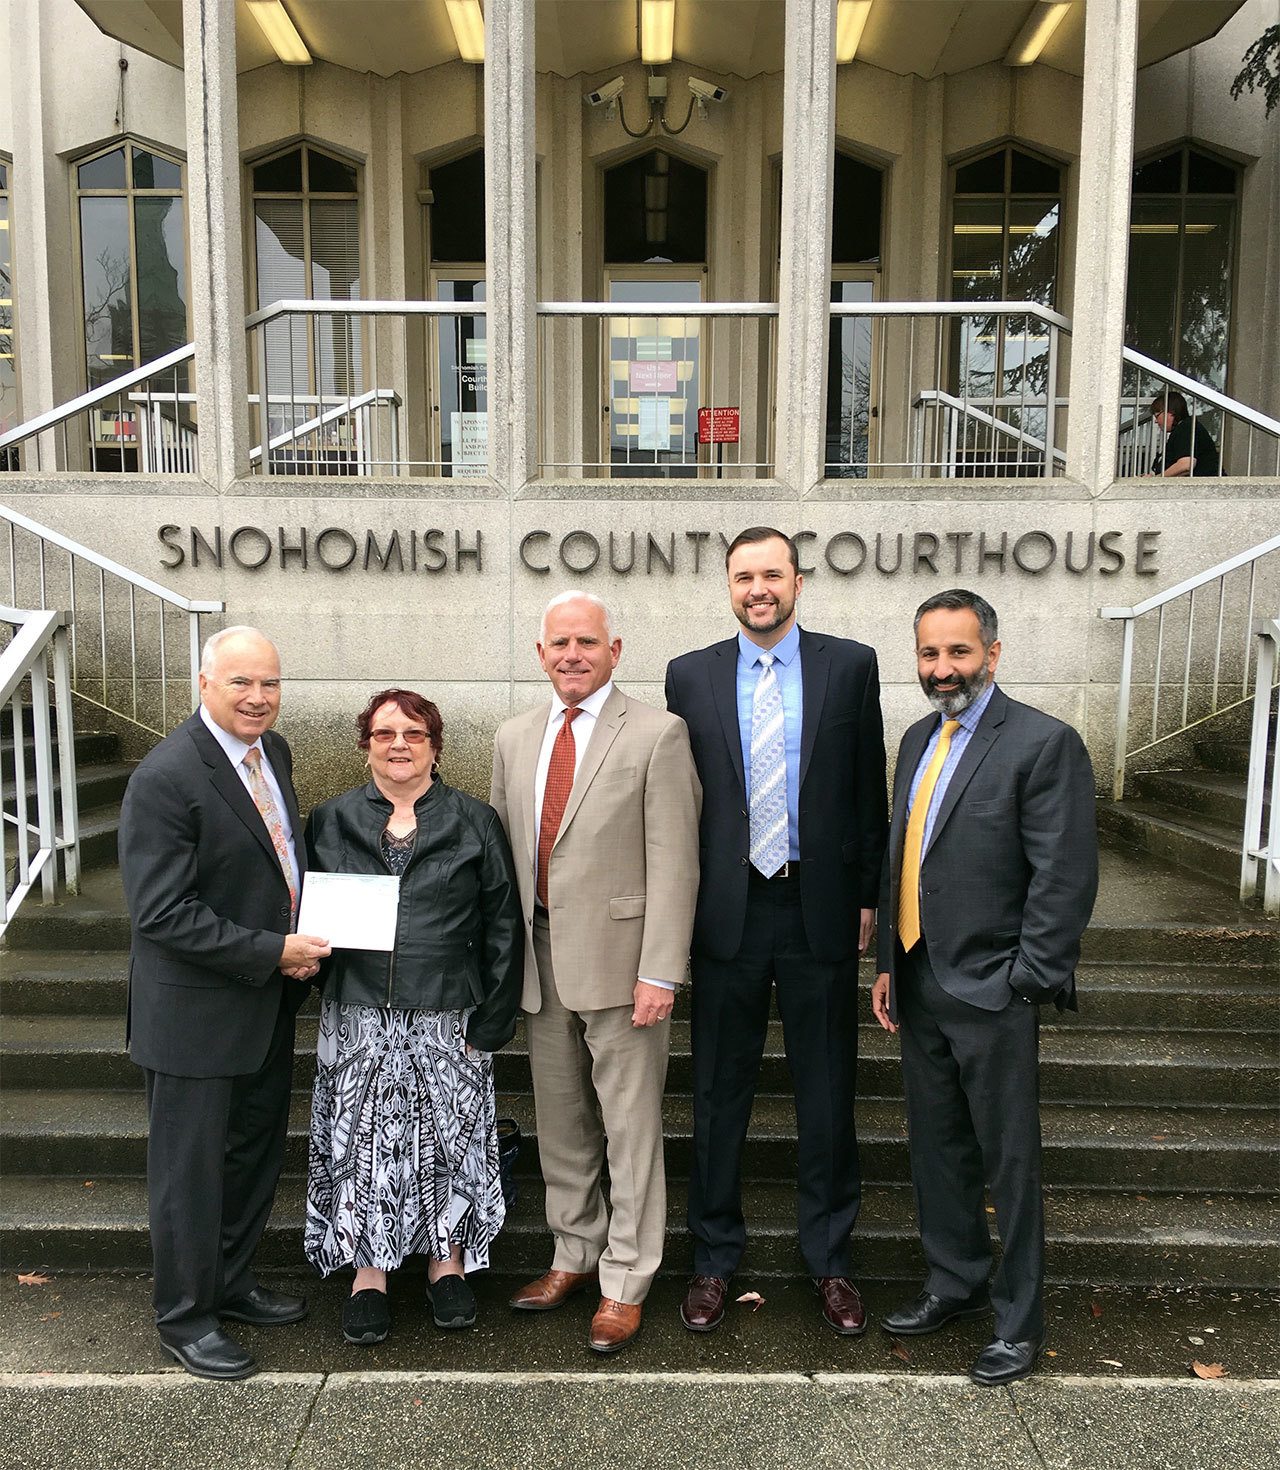 The Snohomish County Bar Association raised $7,702.08 for All Aboard and presented the donation Oct. 19. Pictured from left are SCBA board Secretary William Sullivan, All Aboard finance director Cherie Estok, SCBA tournament committee members Dominic Bacetich and Kevin Anderson, and SCBA board President Gurjit Pandher. (Contributed photo)